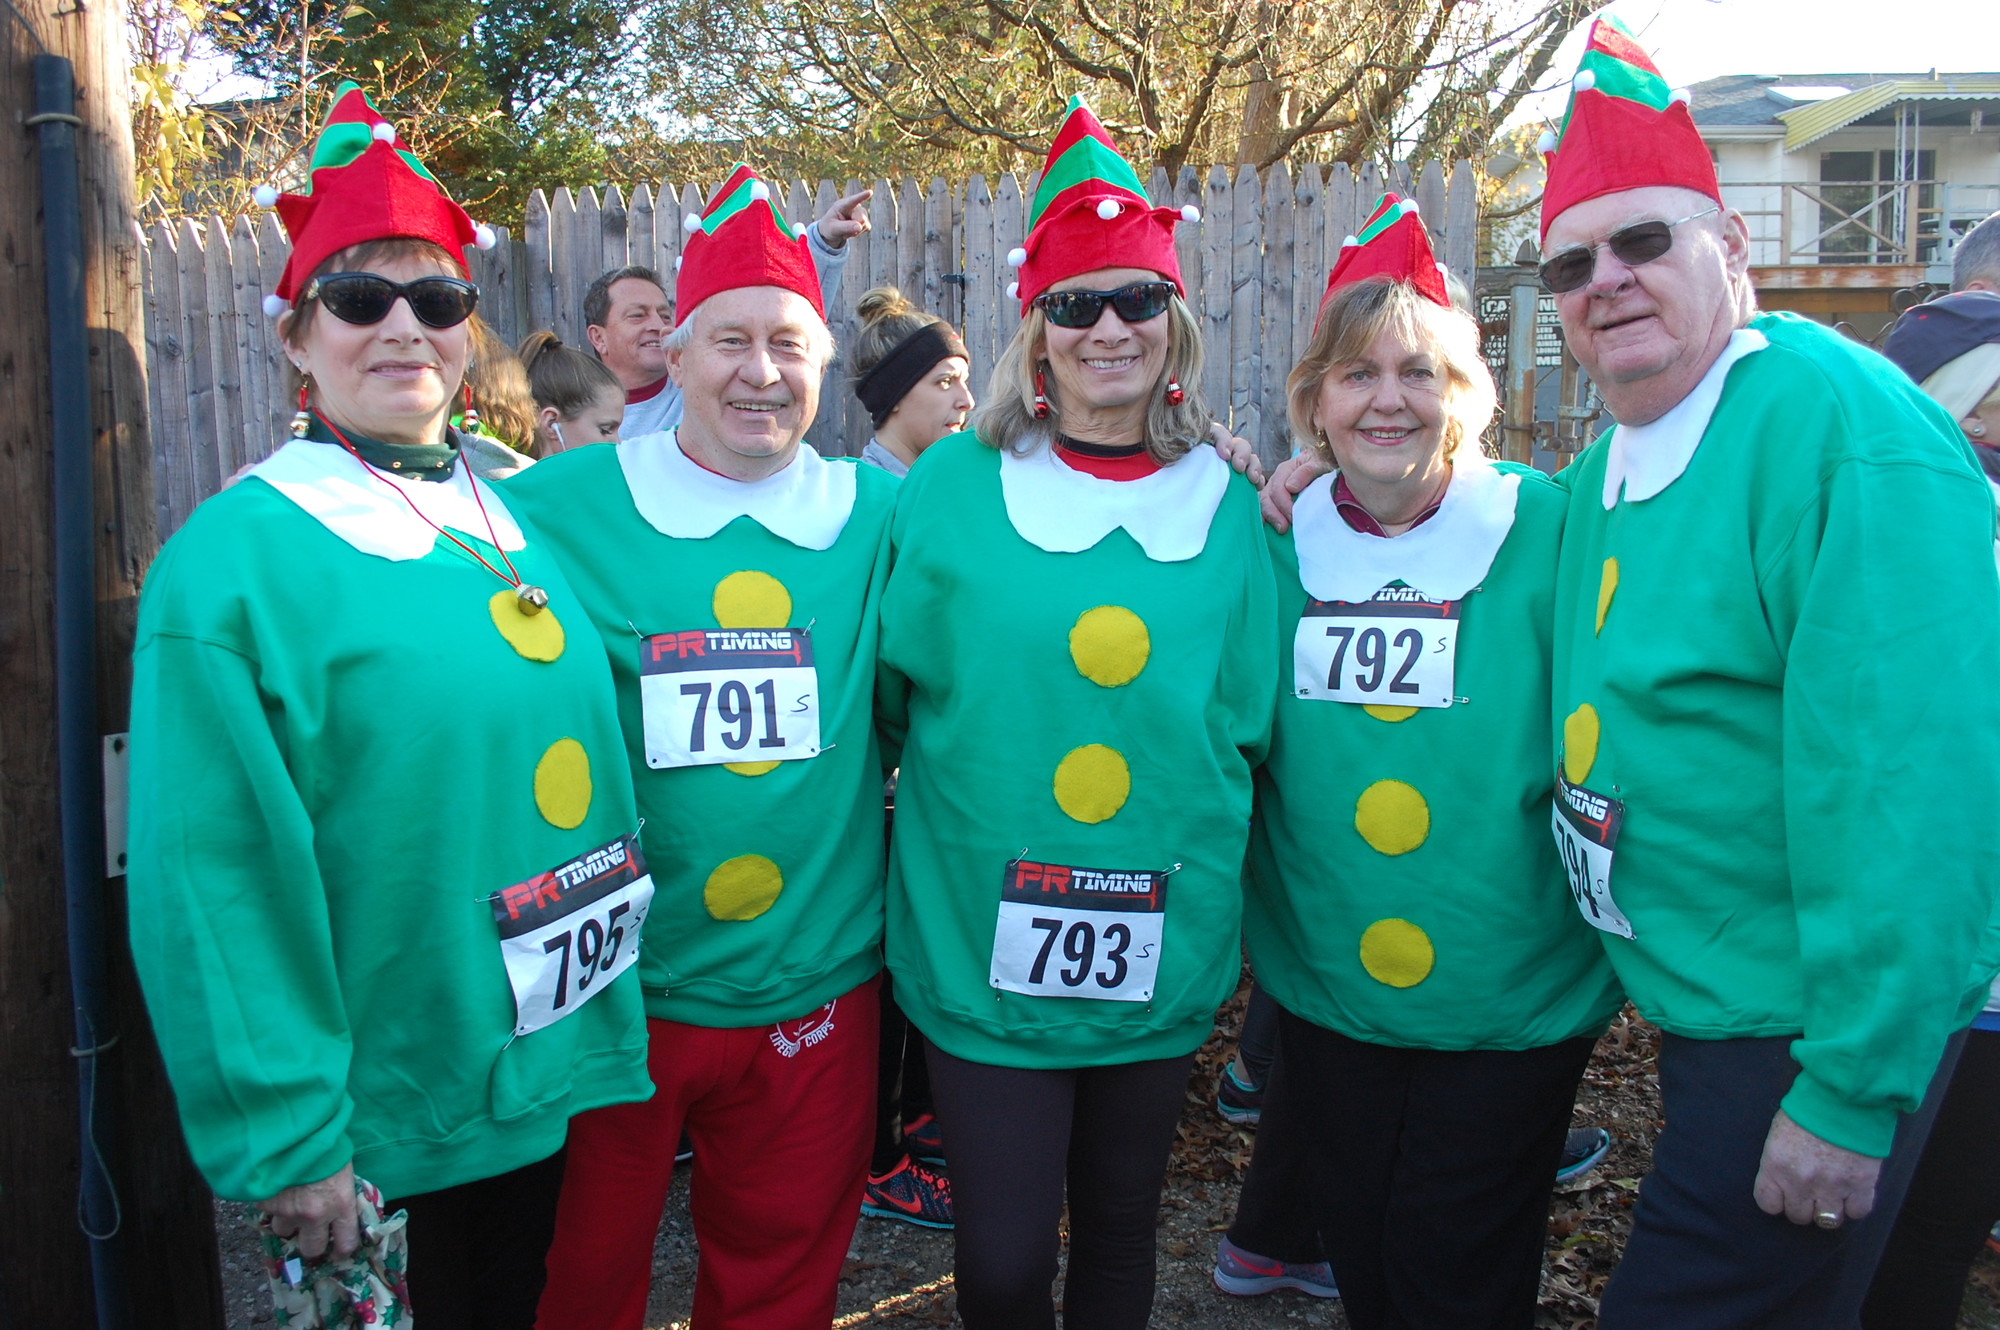 Members of the Seaford Lions Club, including Pat Carpenter, Donald Paulson, Nancy Kohler, Donna Kohler and Charles Wroblewski, ran the race together, dressed as elves.